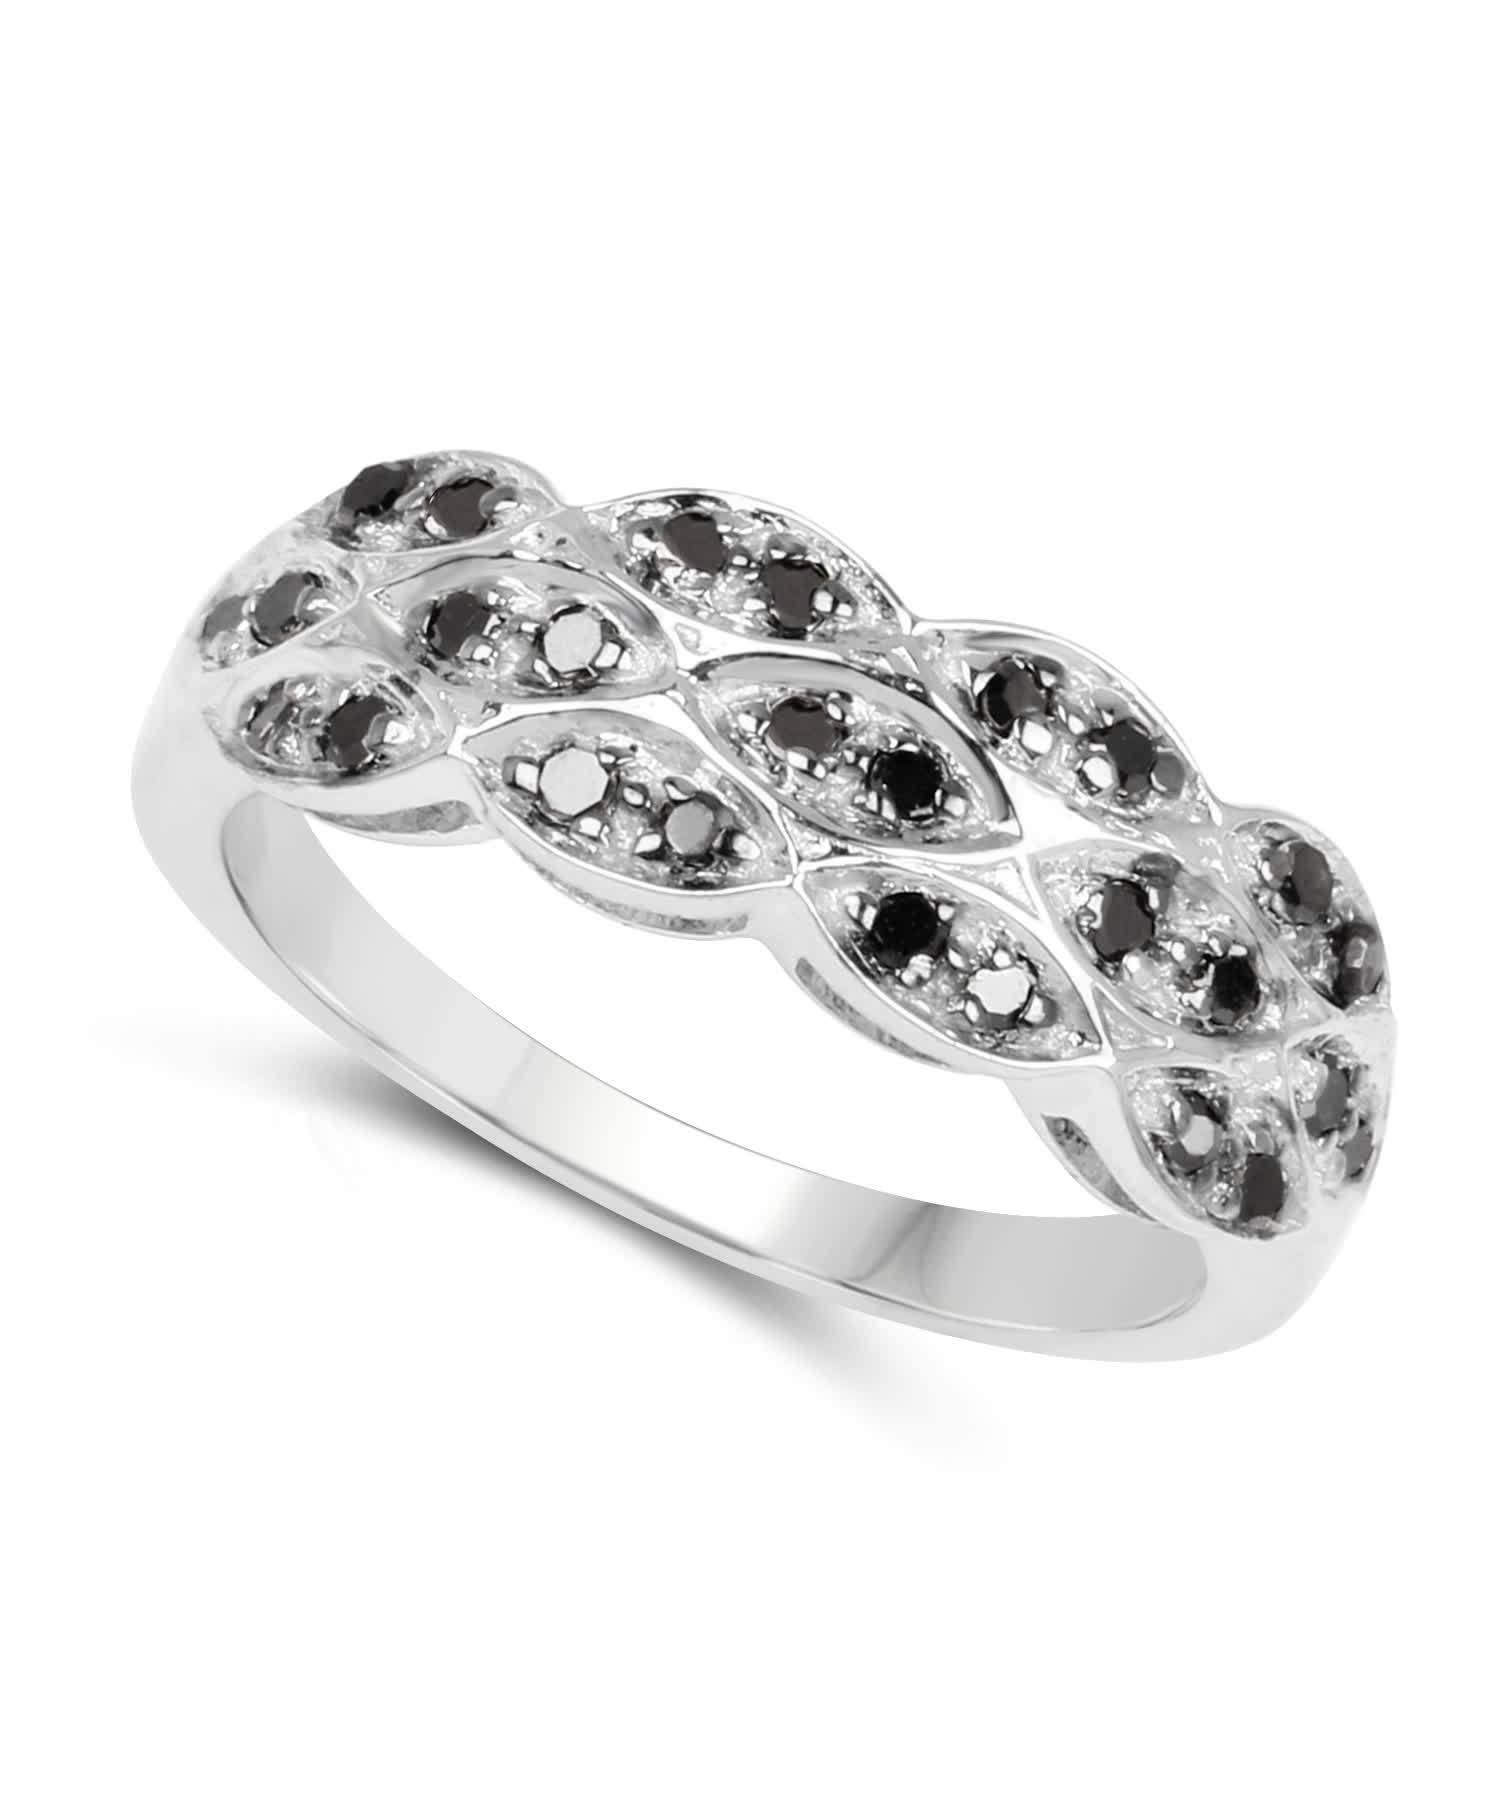 0.28ctw Black Diamond Rhodium Plated 925 Sterling Silver Ring View 2